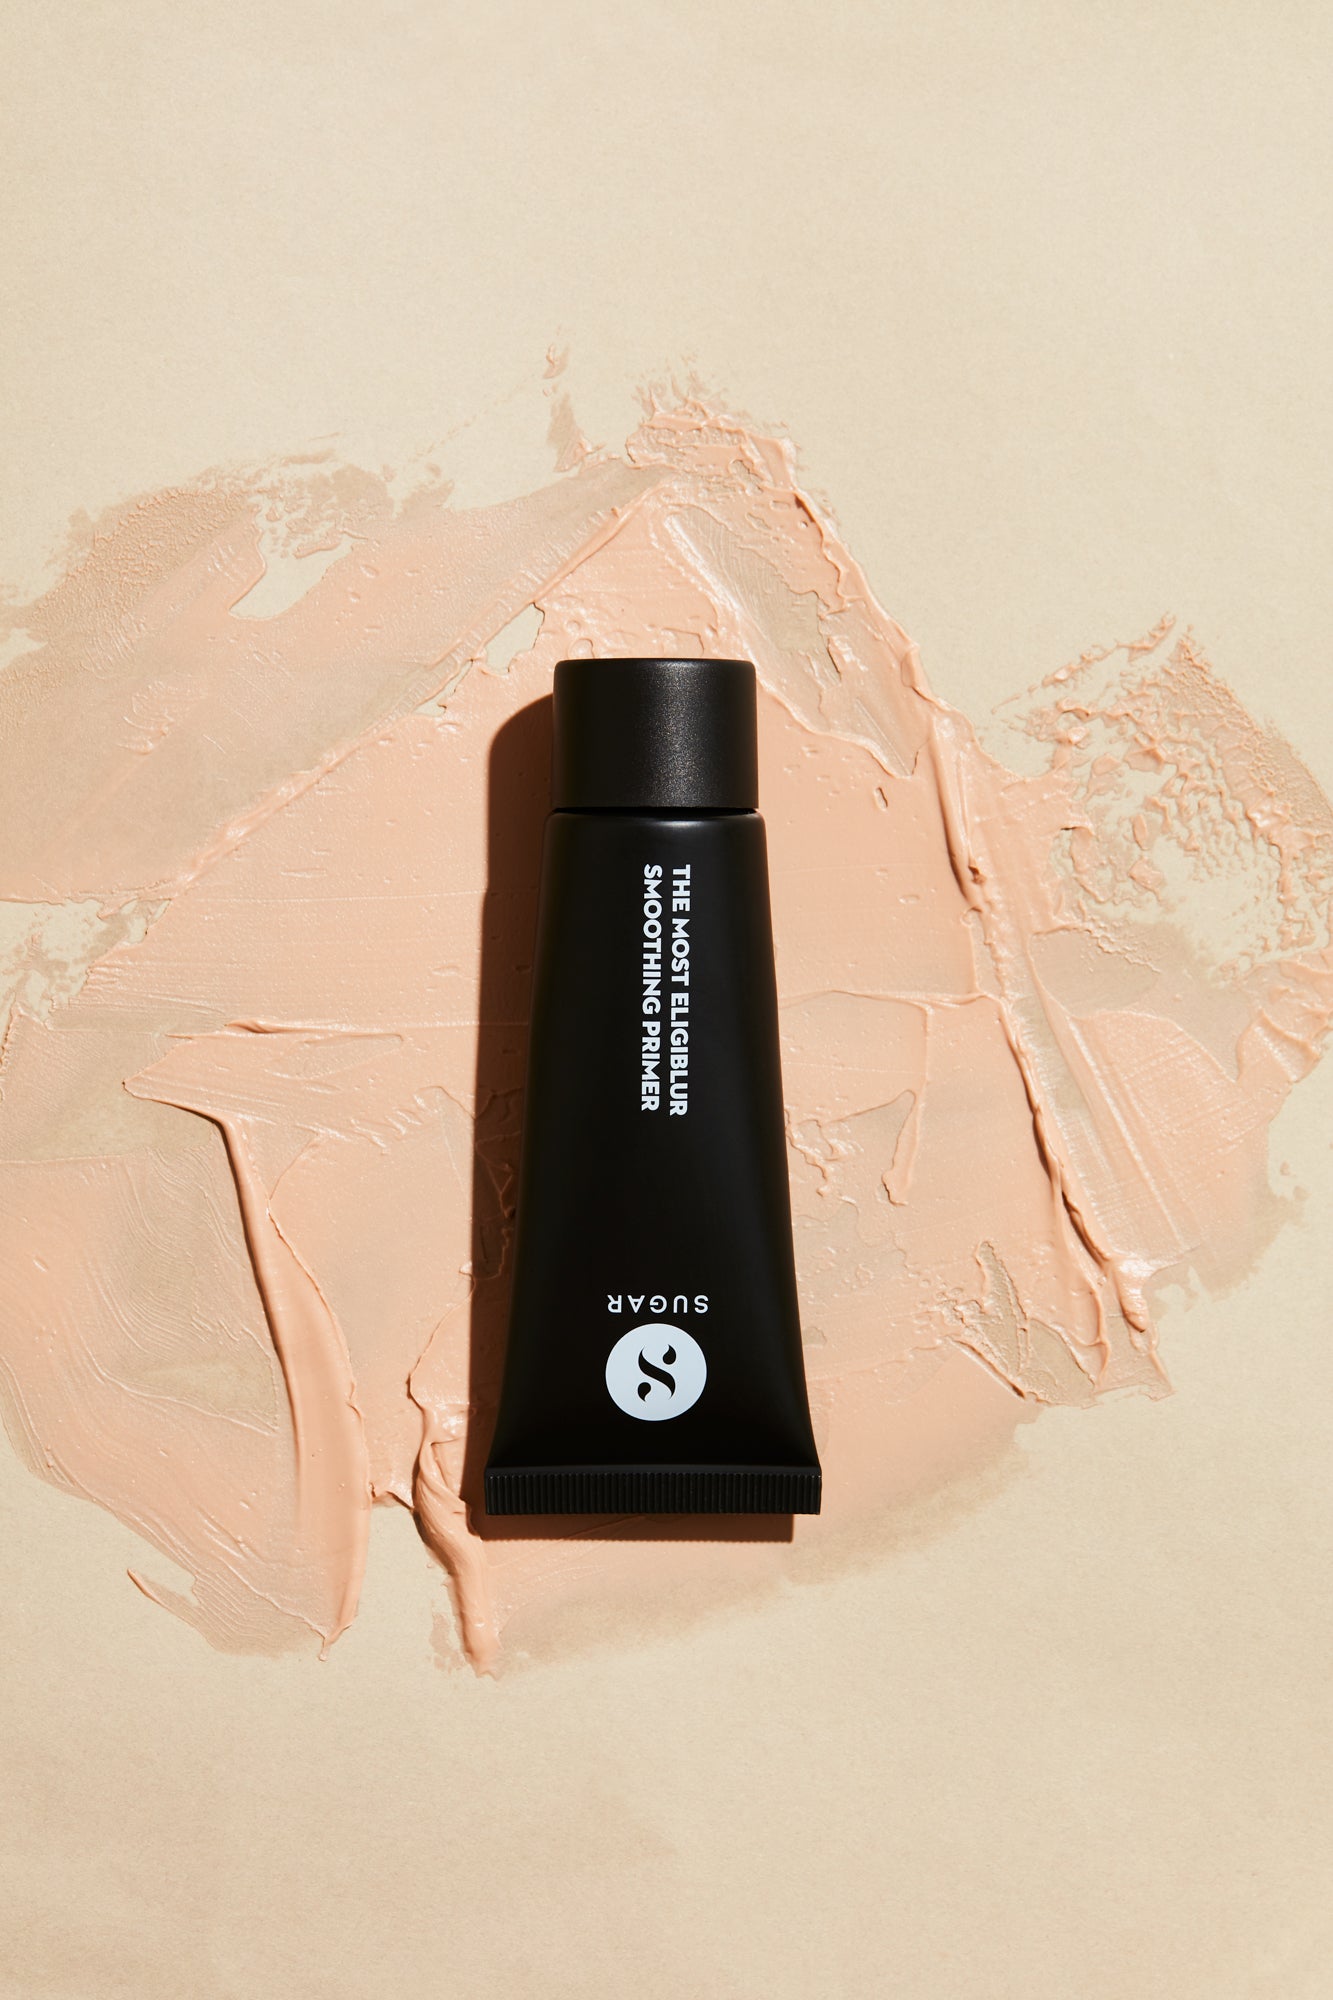 SUGAR The Most Eligiblur Smoothing Primer